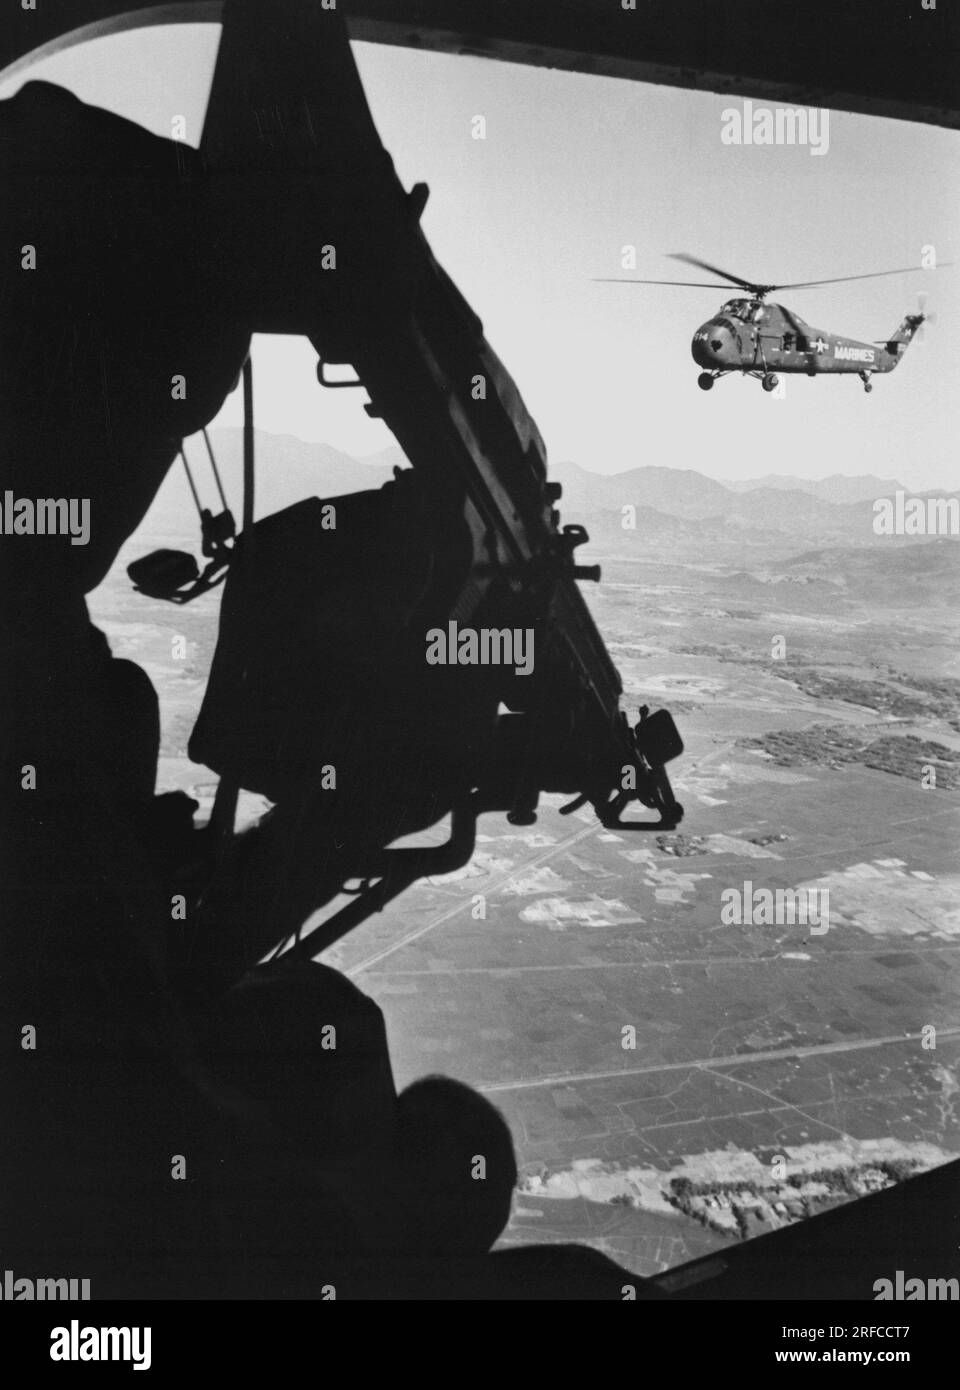 VIETNAM - 1965 - Helicopter gunner during combat in Vietnam against North Vietnamese communist forces in an unidentified area of South Vietnam - Photo Stock Photo